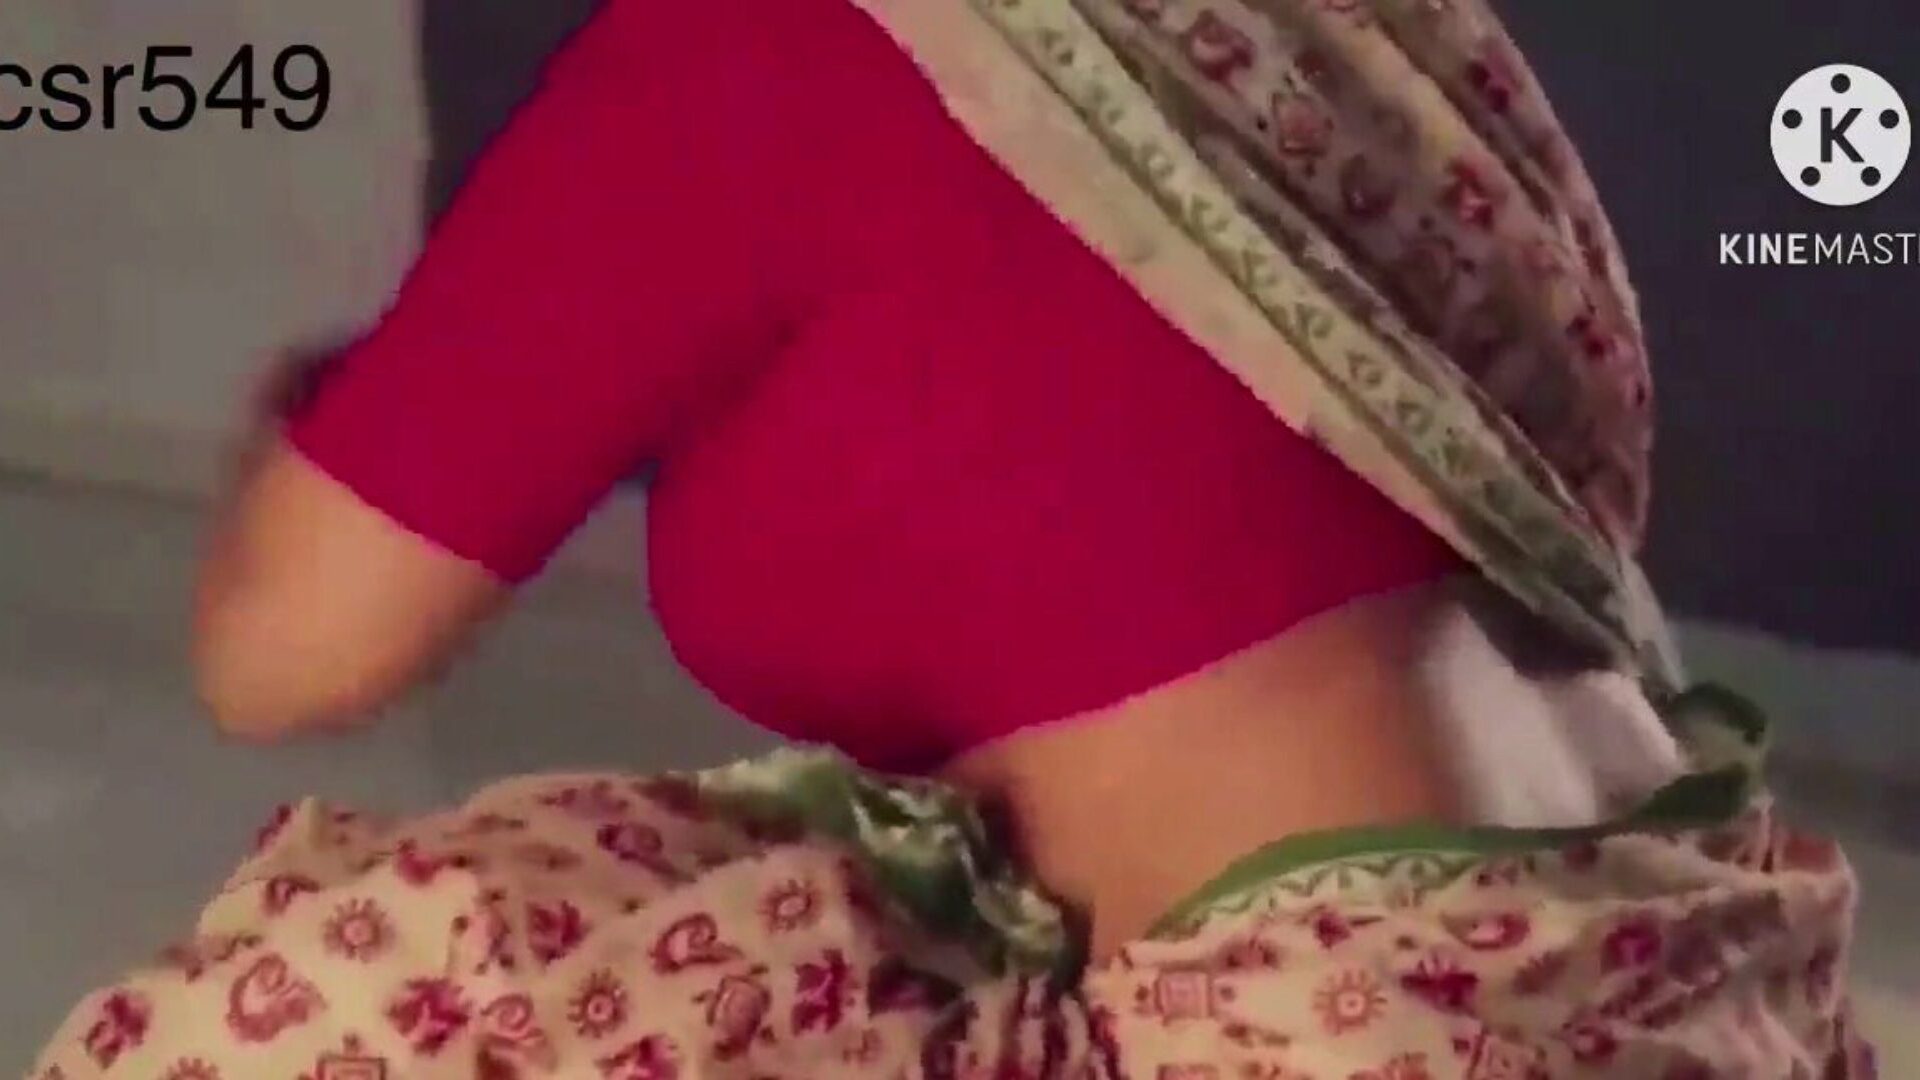 desi sexy n juicy red saree women getting fucked by ... watch desi sexy and juicy woman in a red saree getting fucked by servant film on xhamster - the ultimate database of free-for-all asian indian hd porno tube vids